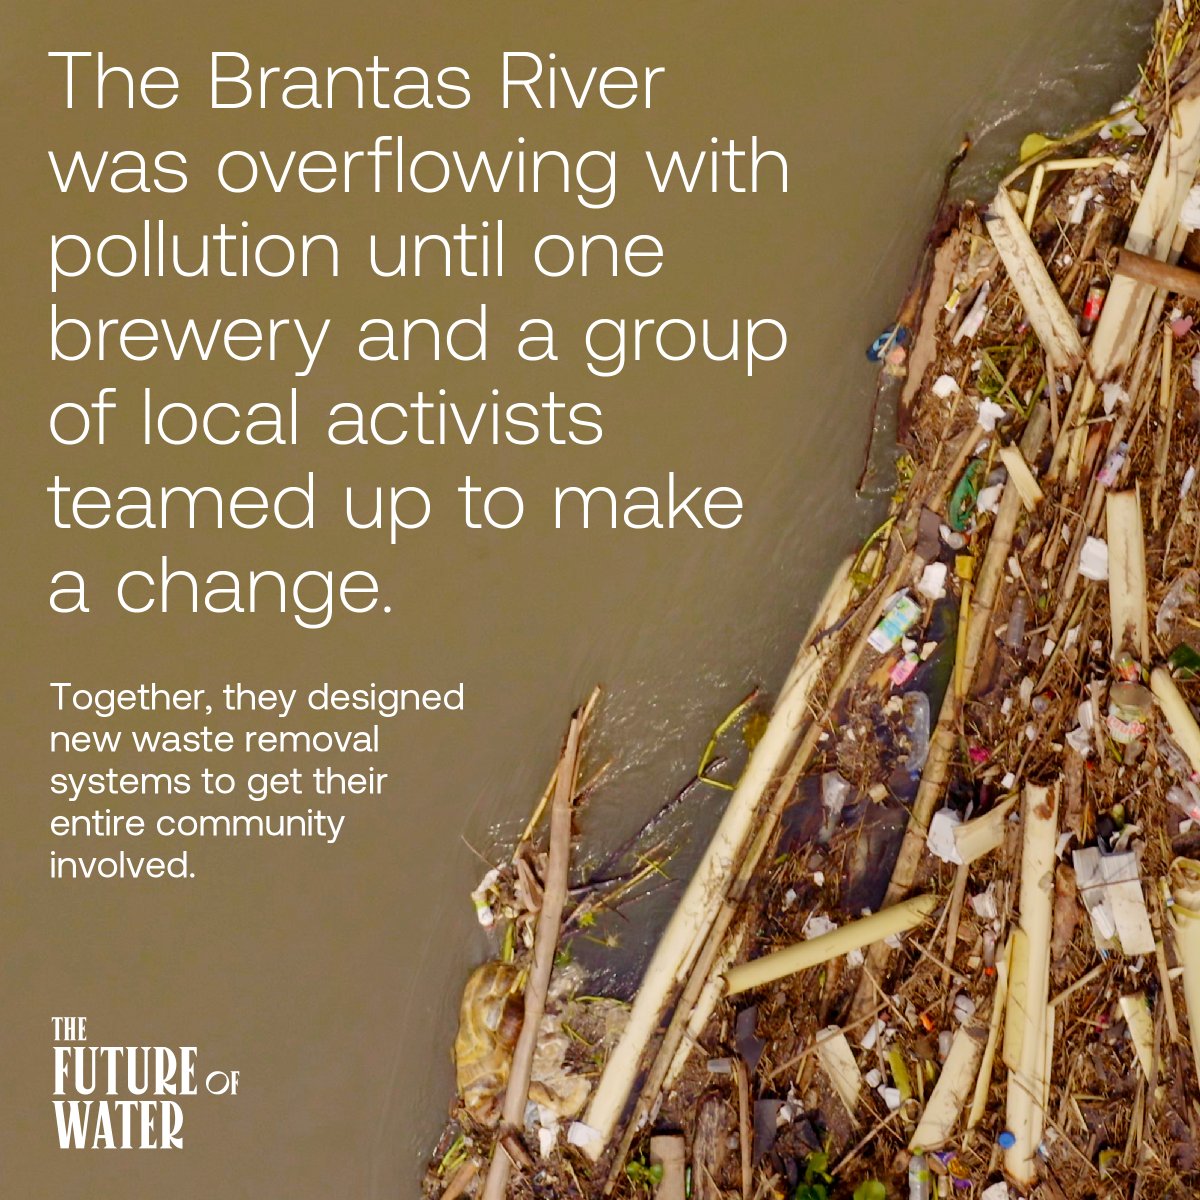 When a river in East Java, Indonesia became polluted, @Heineken's Multi Bintang brewery teamed up with local environmentalists to develop waste removal & recycling systems, educating the community through incentive programs. ➡️ bit.ly/434zSZq #FutureForward